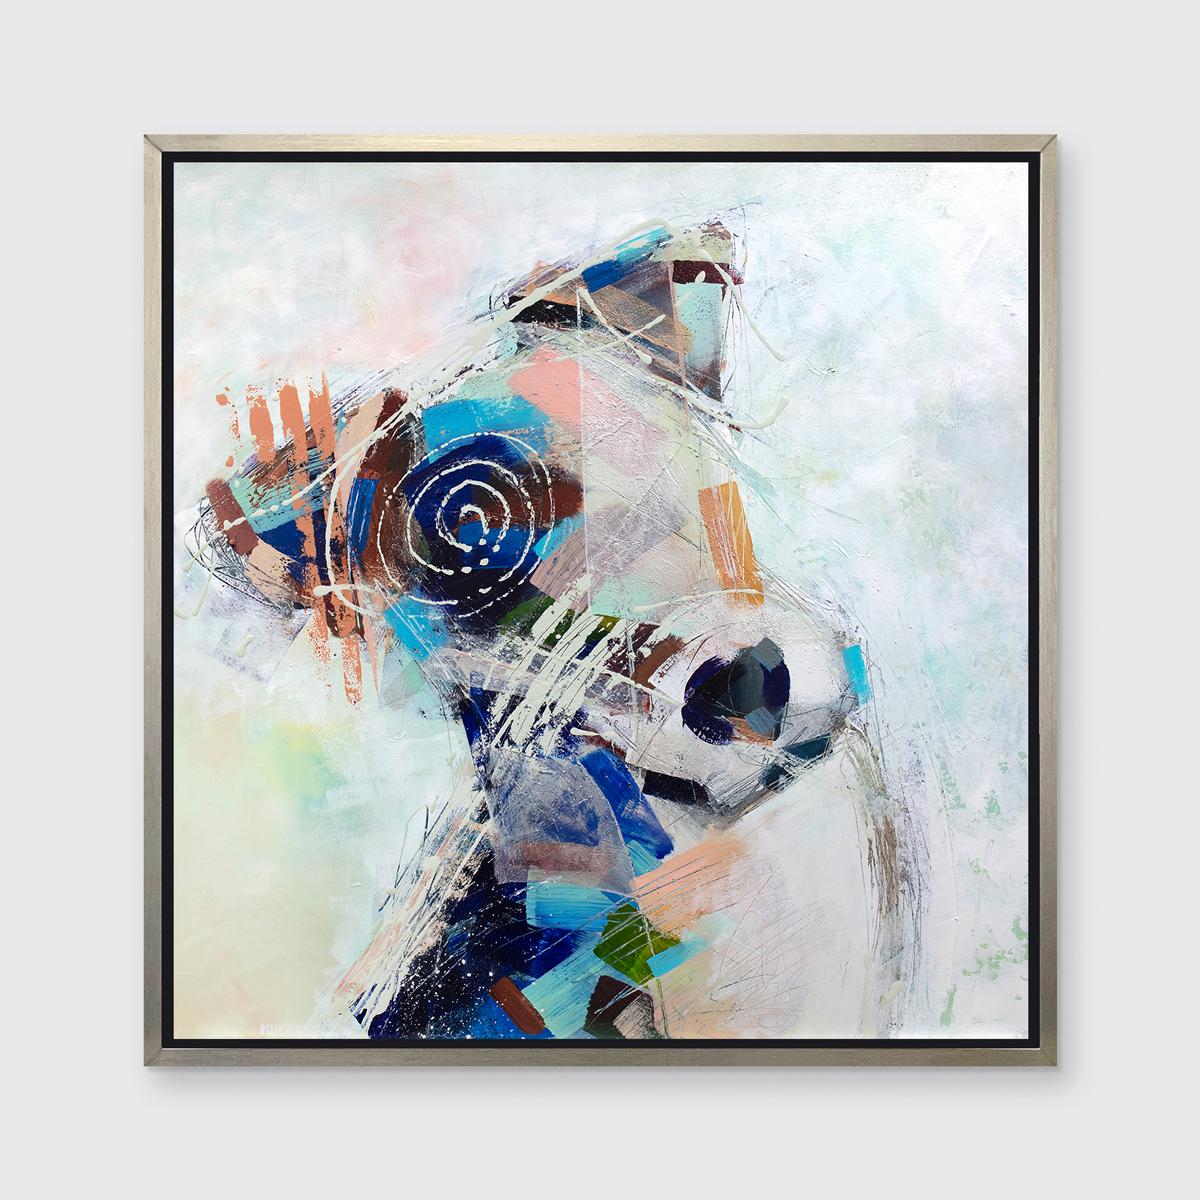 Russell Miyaki Abstract Print - "Course Dog" Limited Edition Giclee Print, 36" x 36"